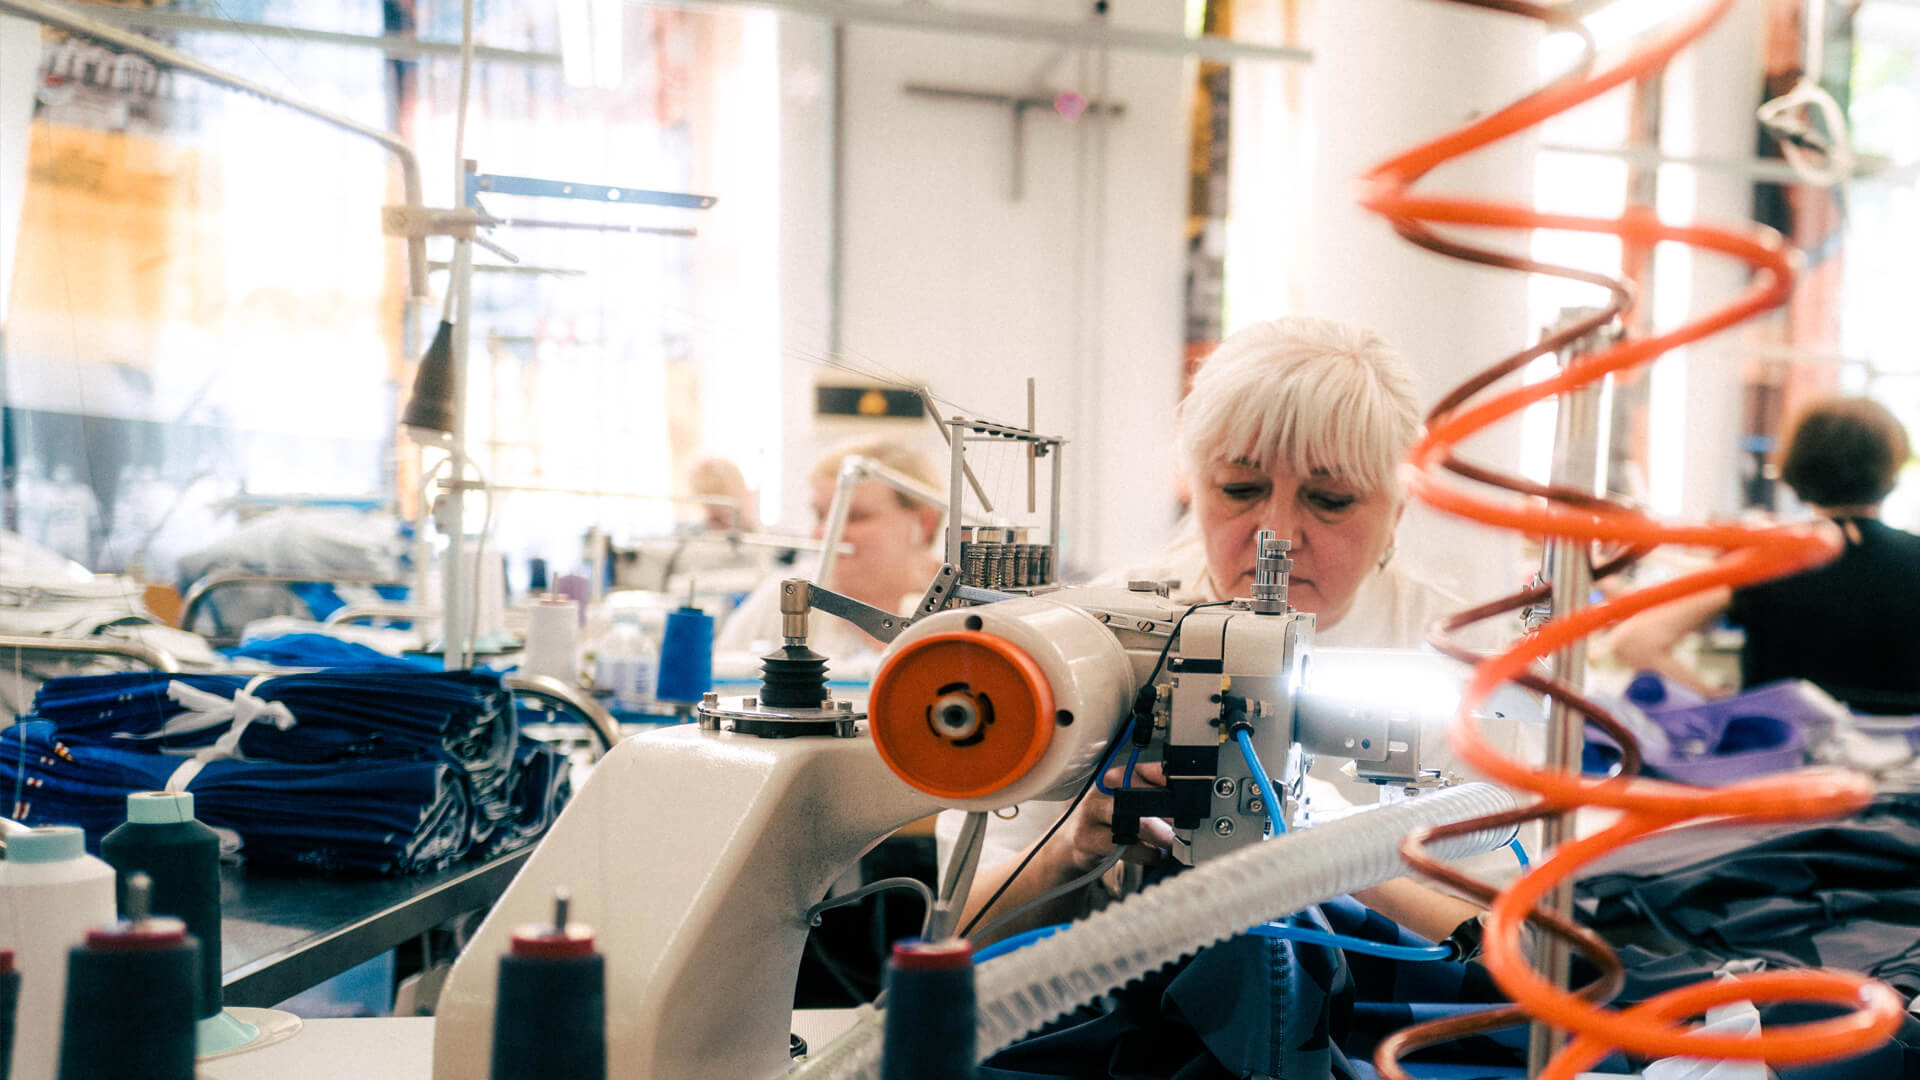 Who makes sustainable clothing? Let’s go behind the seams